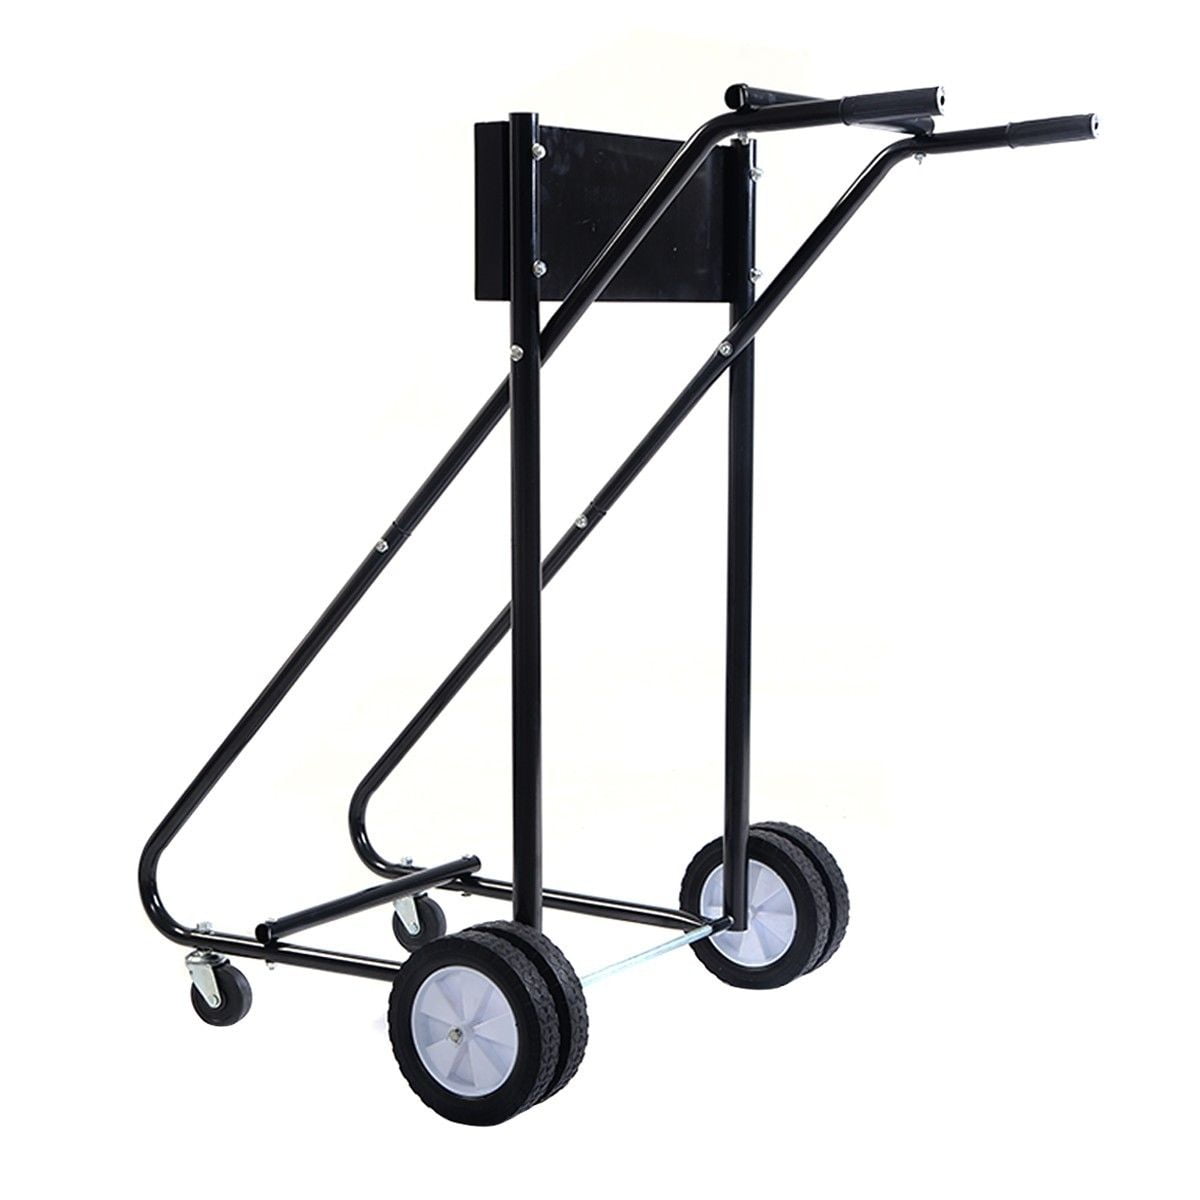 Ideal 315 LBS Outboard Boat Motor Stand Carrier Cart Dolly Storage Pro Heavy Duty 